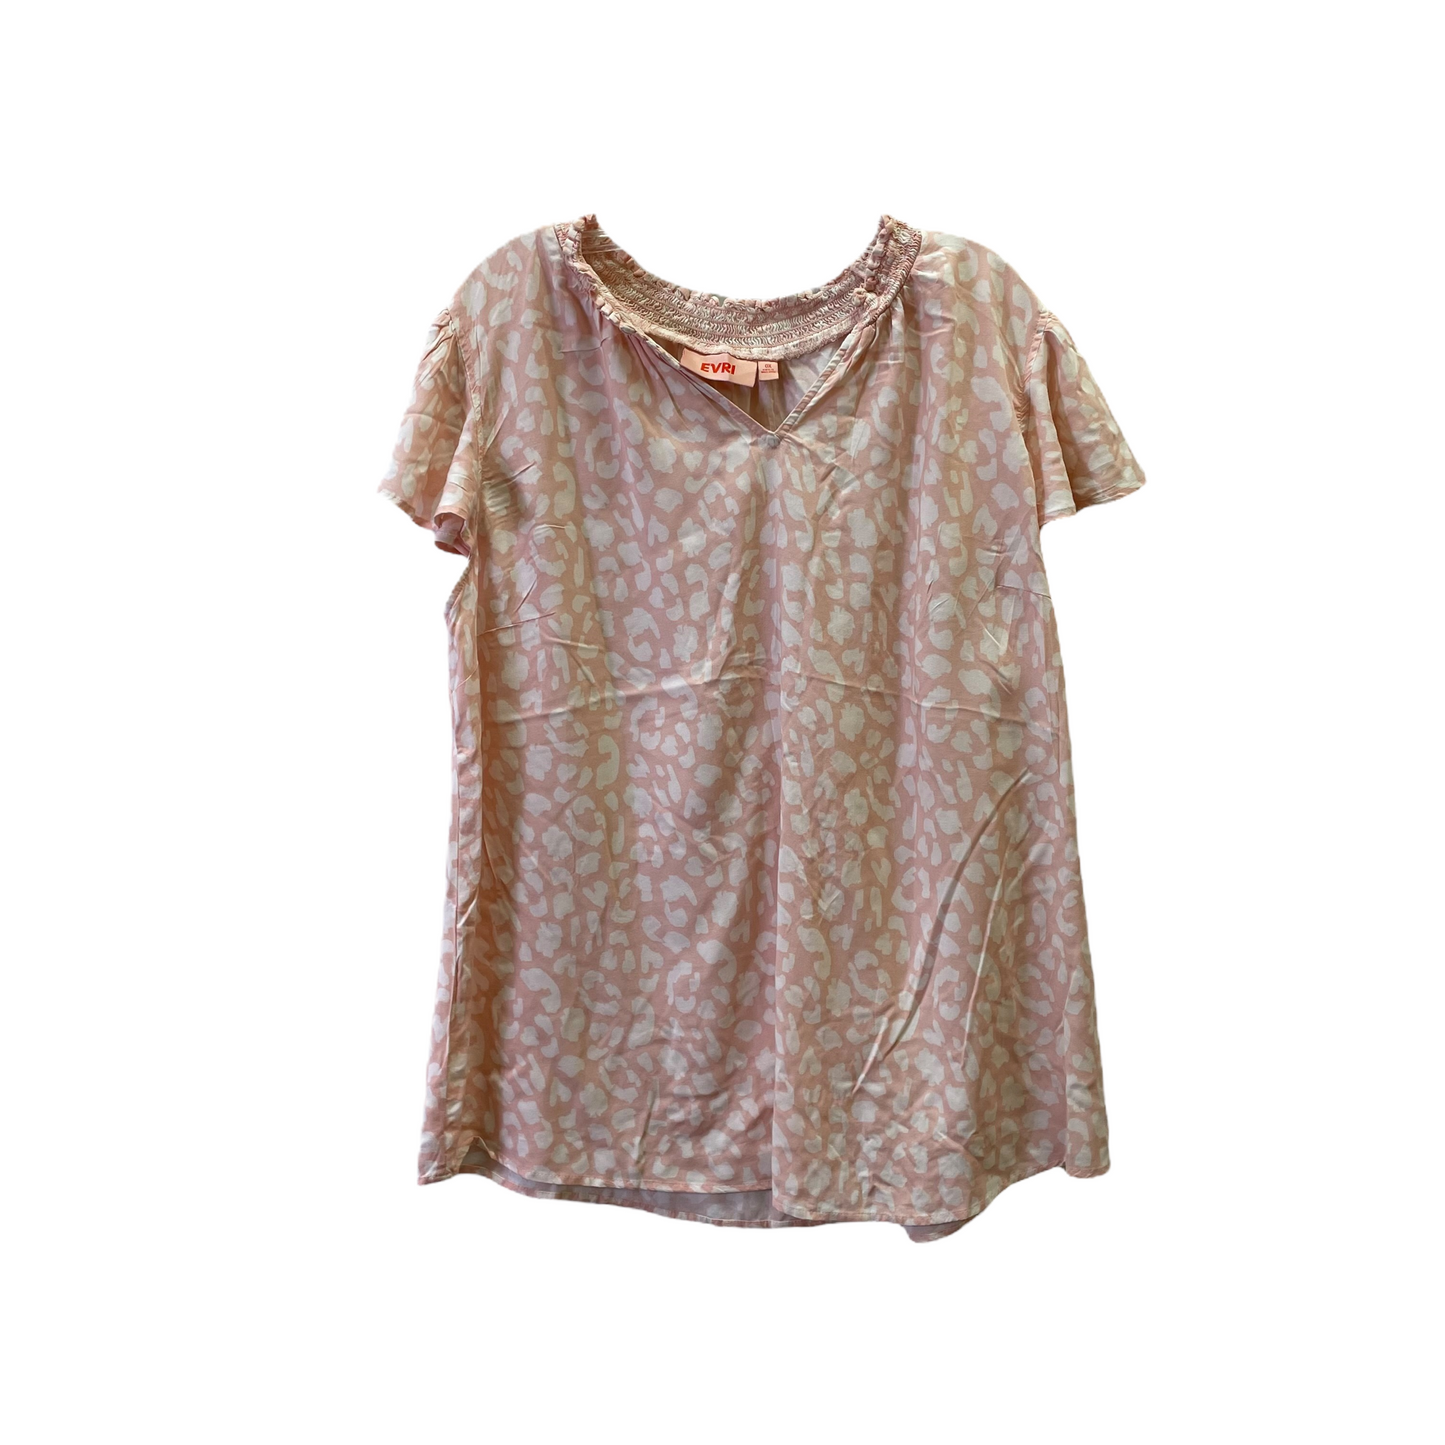 Pink Top Short Sleeve By Evri, Size: S